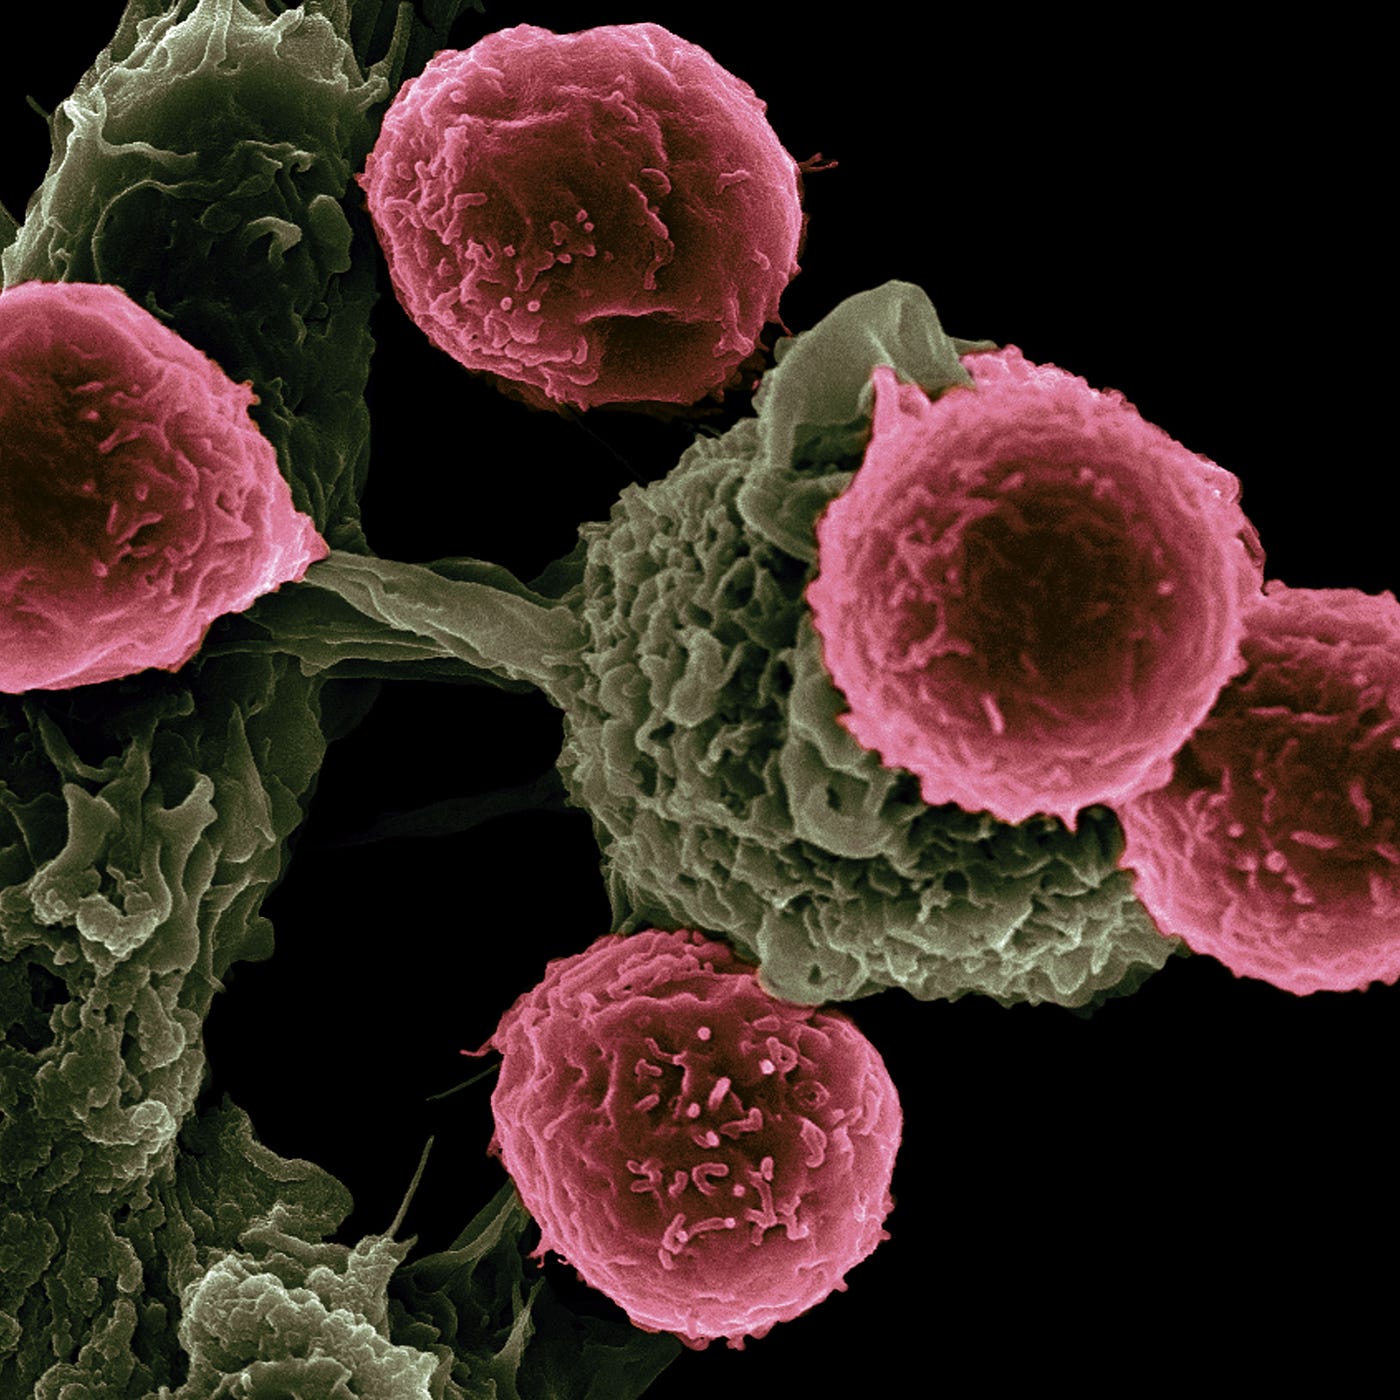 Cancer cell (yellow-green) being attacked by five pink-coloered immune system cells. Black background.